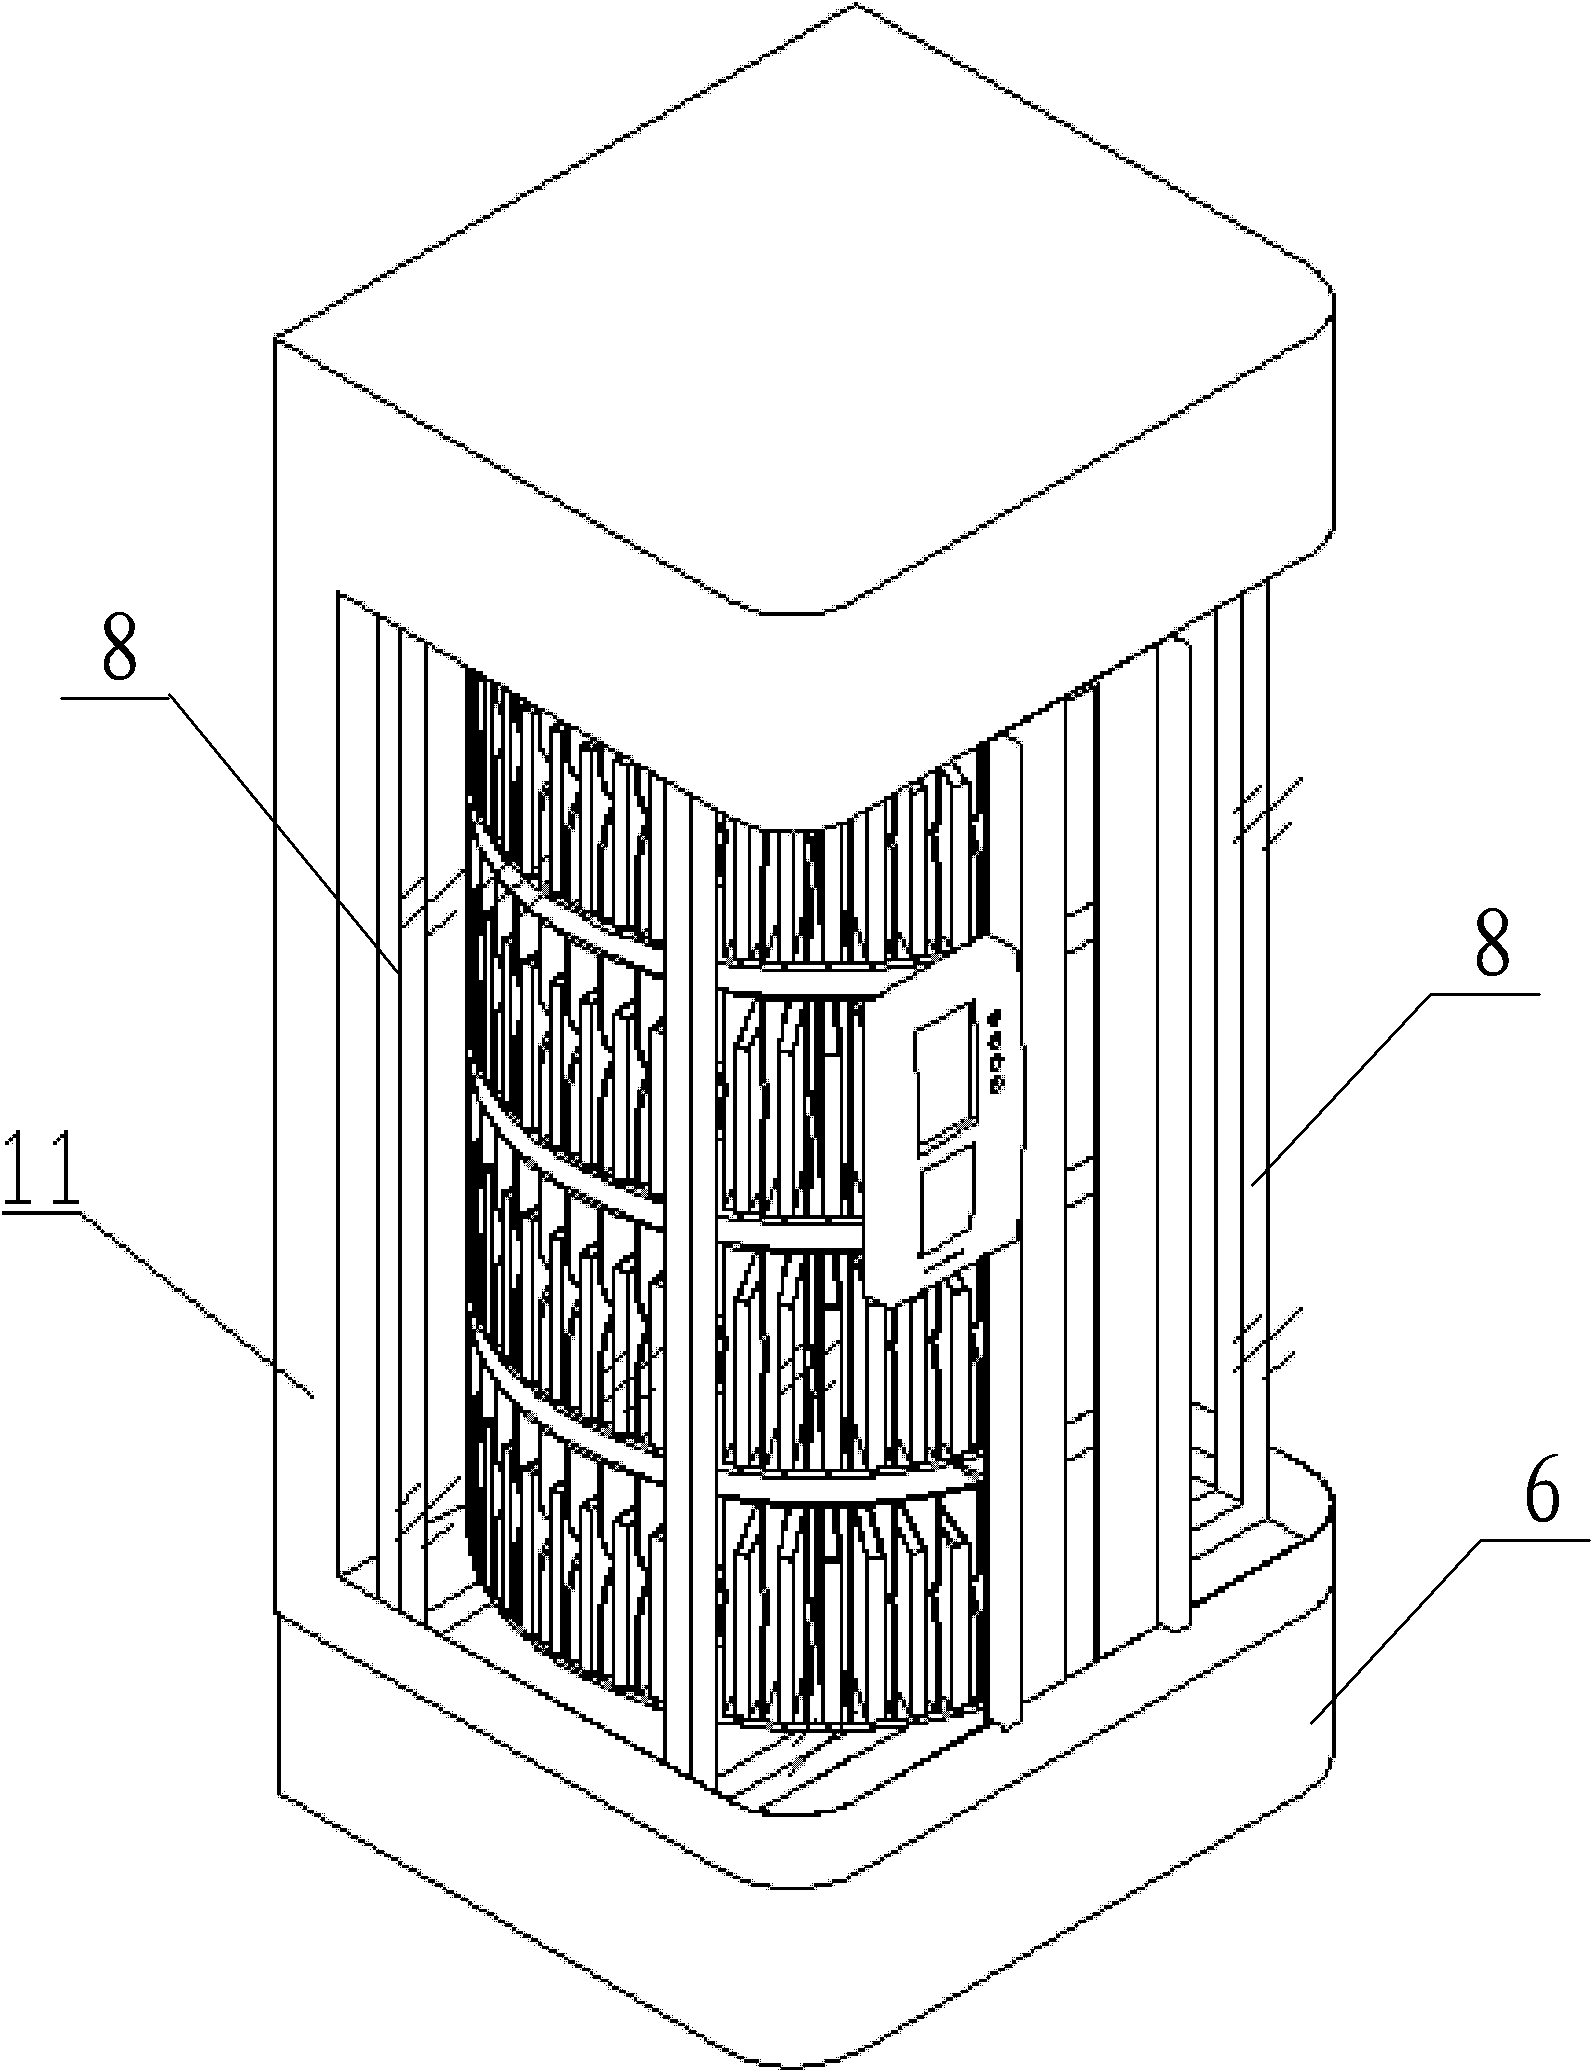 Self-service storage-extraction device